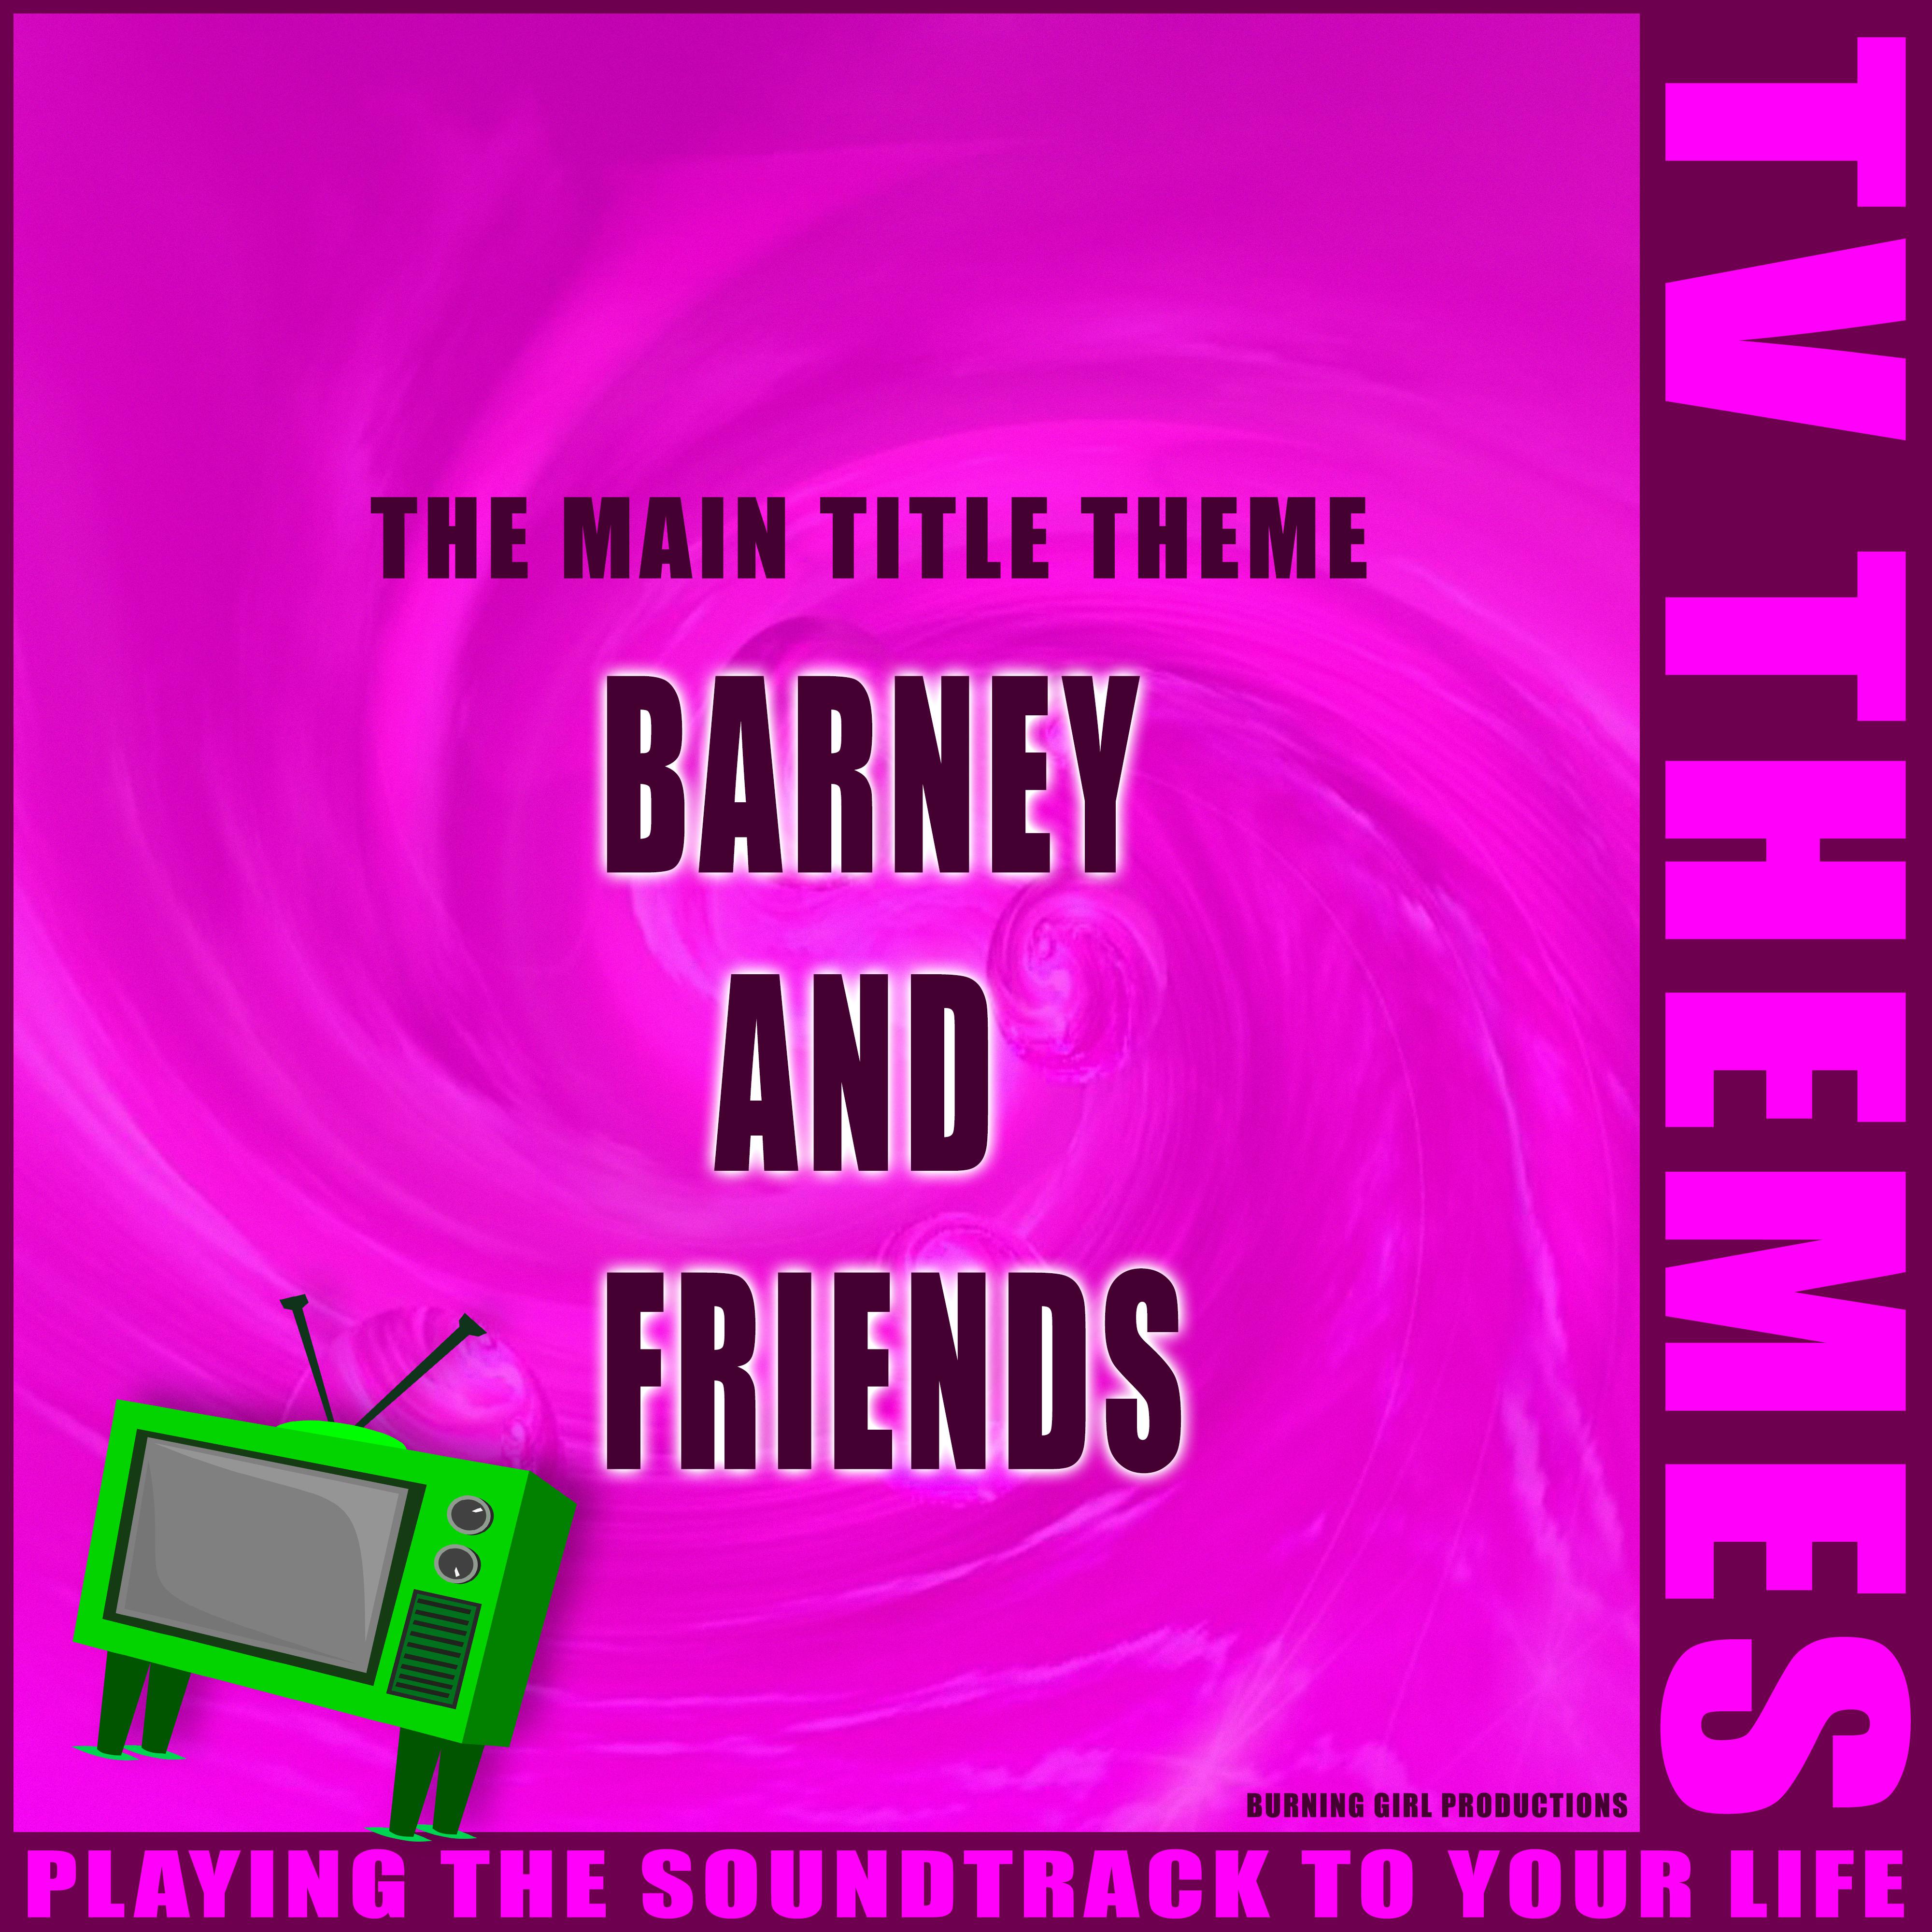 The Main Title Theme - Barney and Friends